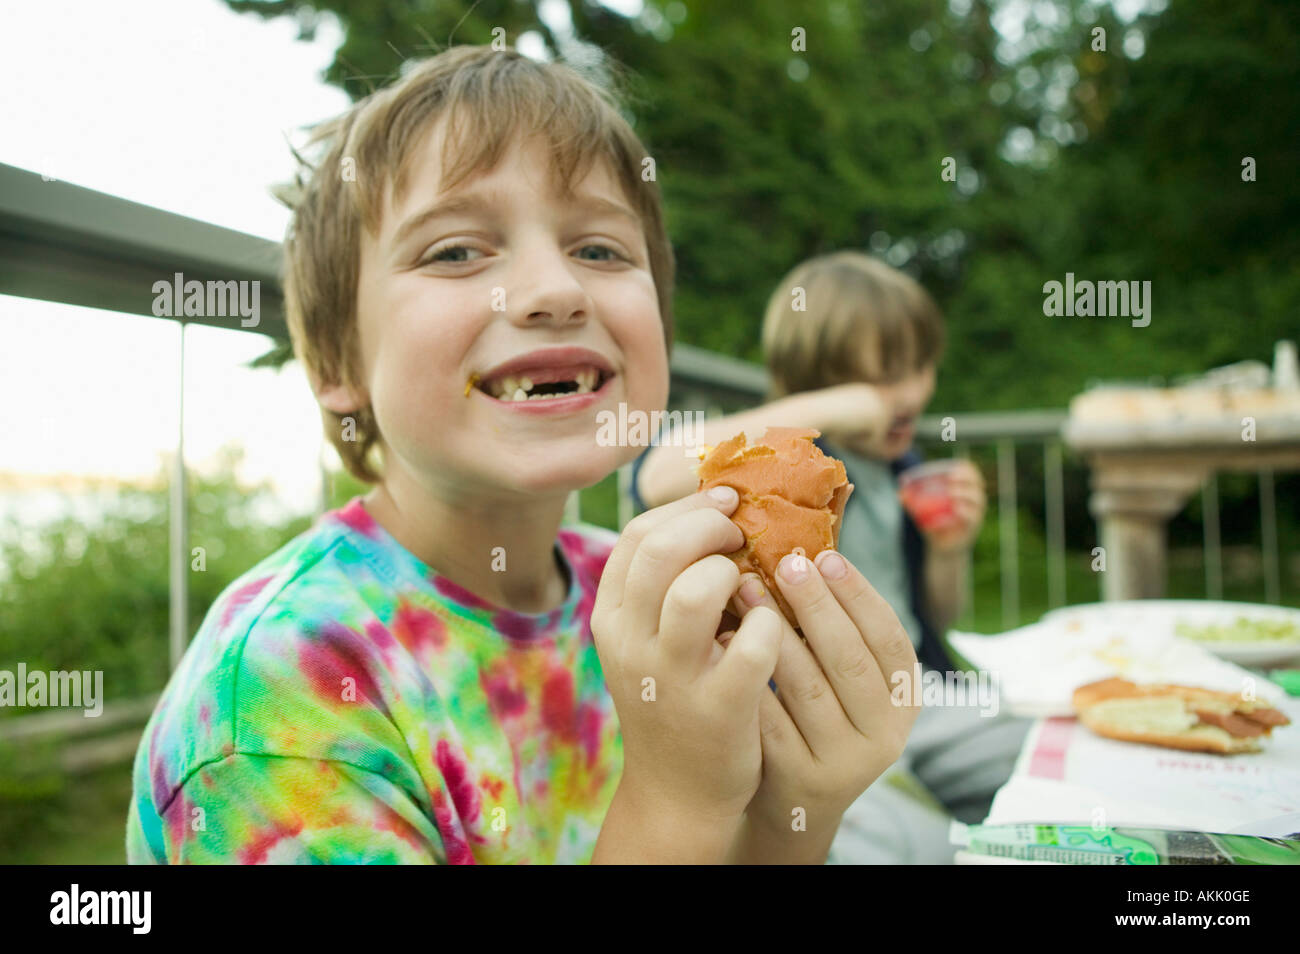 Boy with missing teeth eating lunch Stock Photo